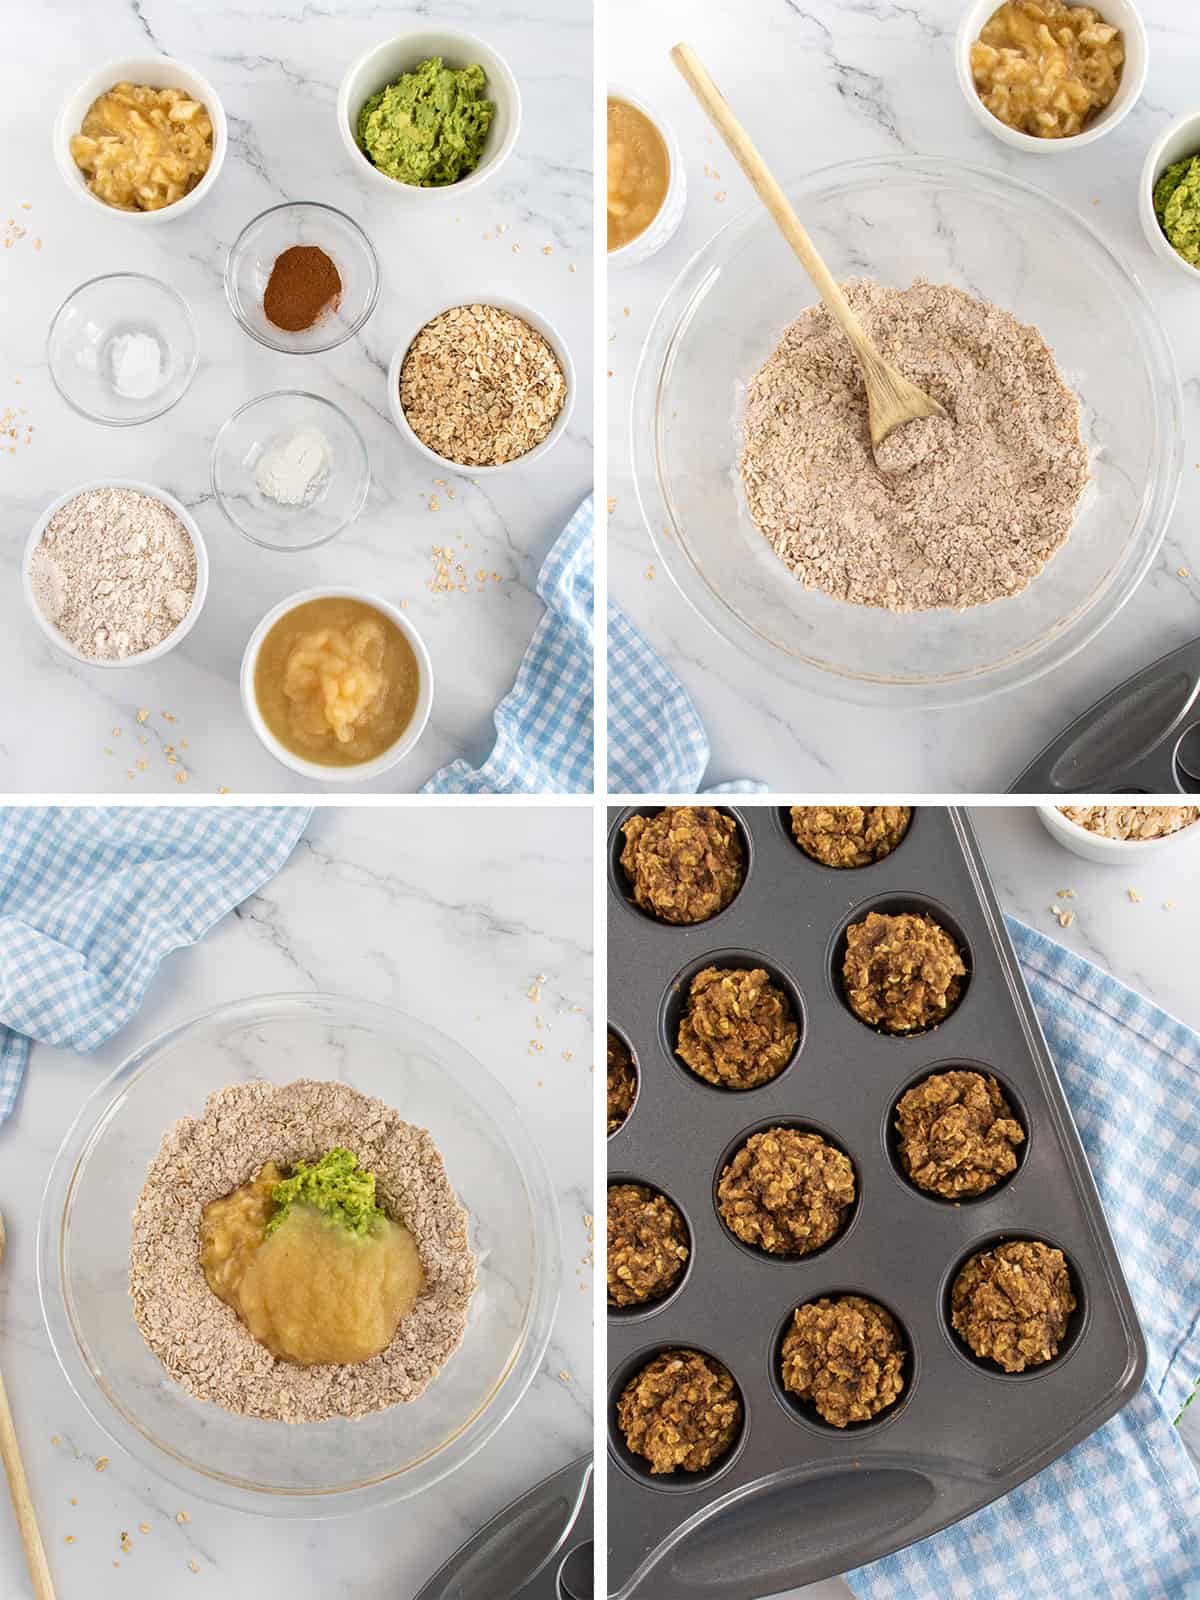 Baby Food Muffins by The BakerMama